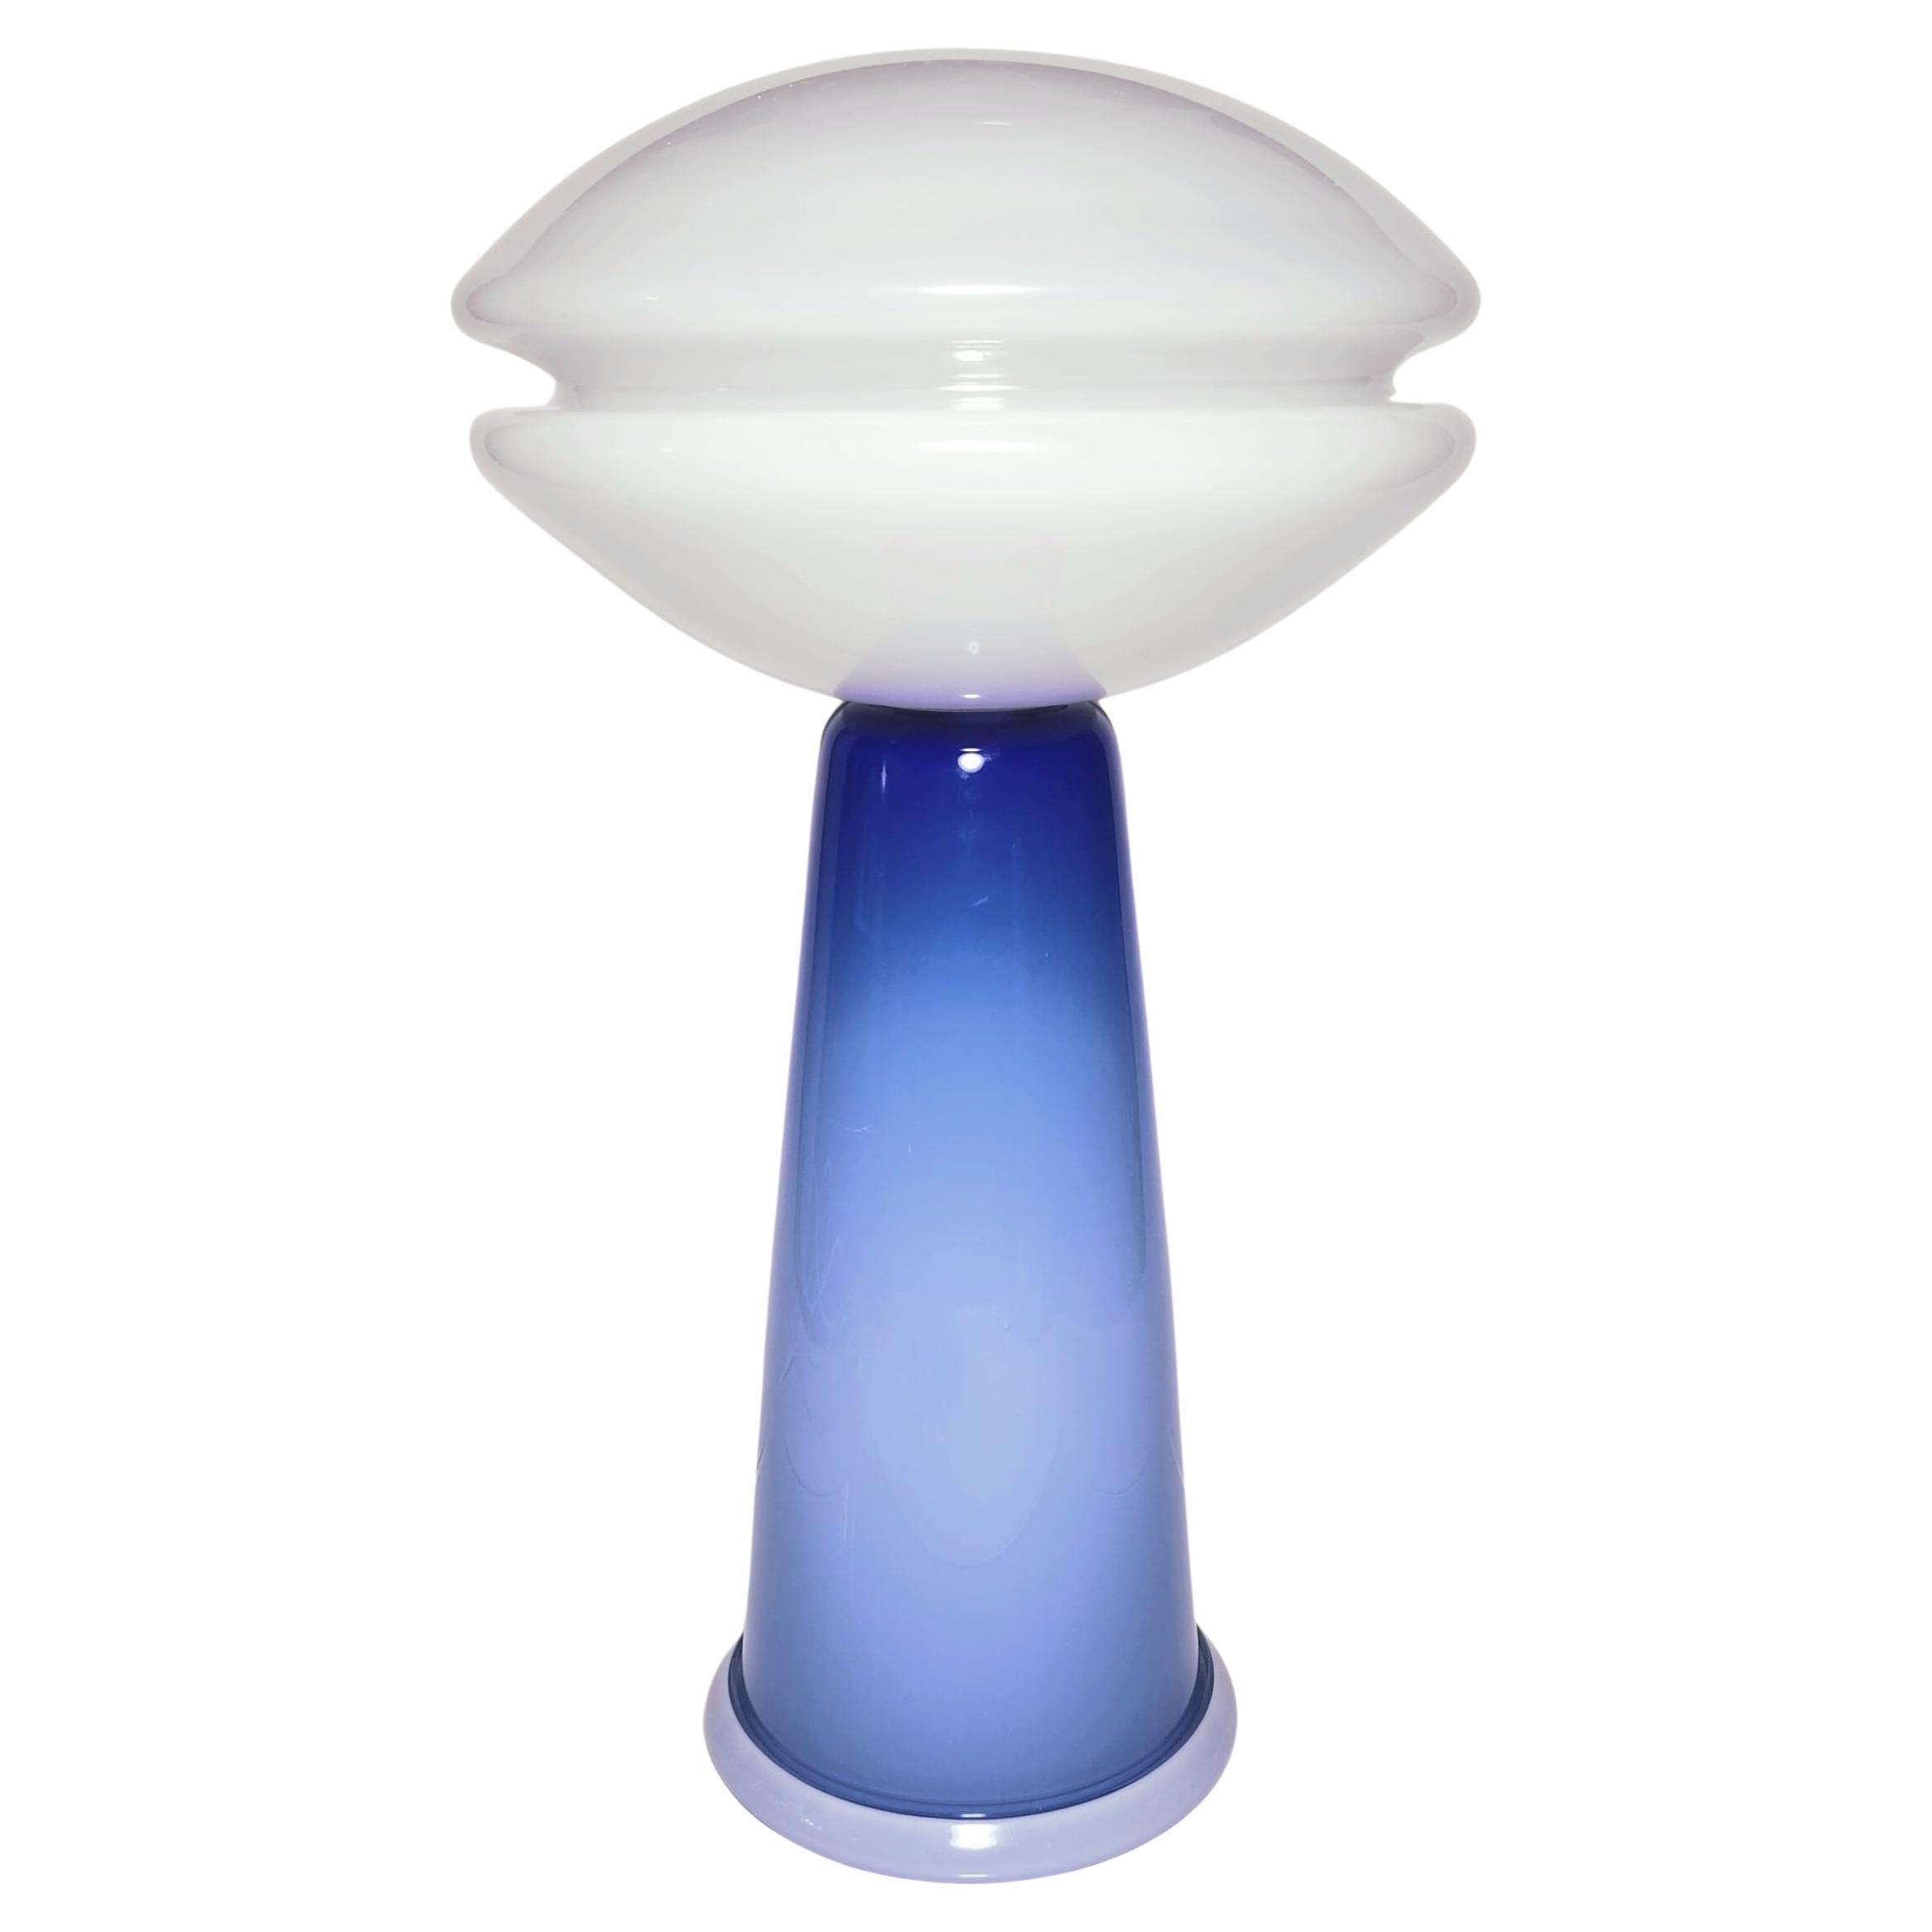 Groove Series Futura Table Lamp in Blue, Contemporary Lighting Design For Sale